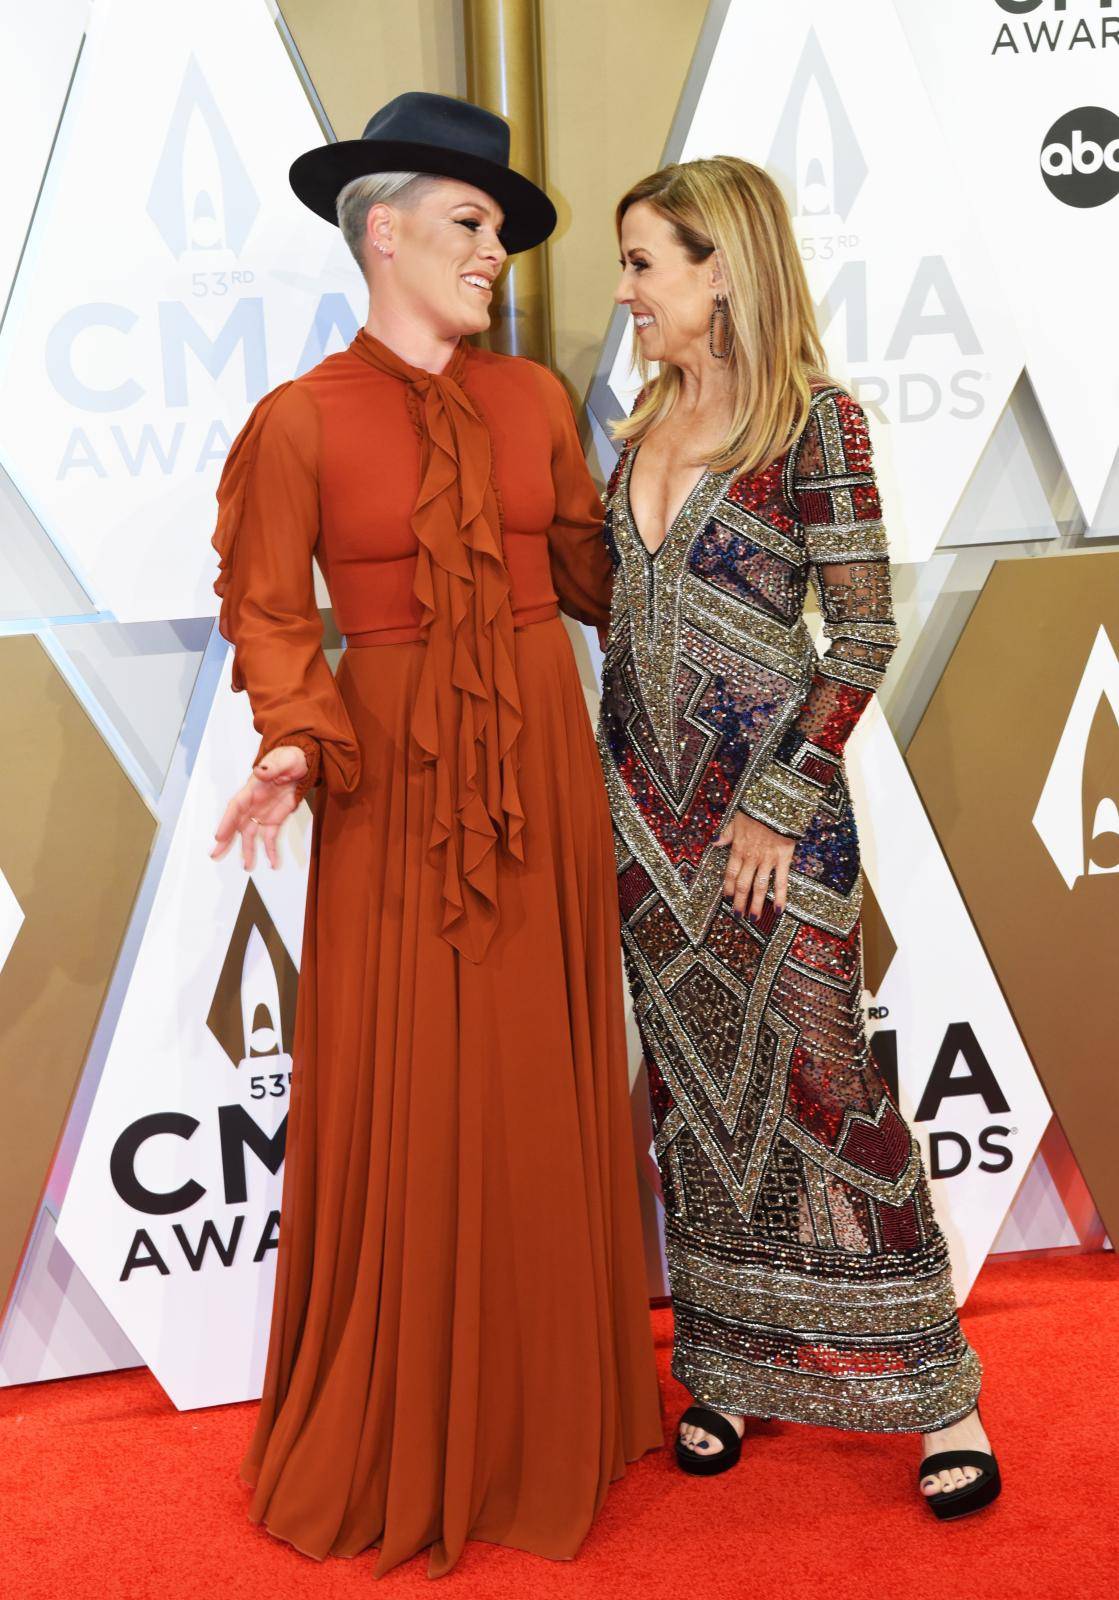 The 53rd Annual CMA Awards - Arrivals - Nashville, Tennessee, U.S.